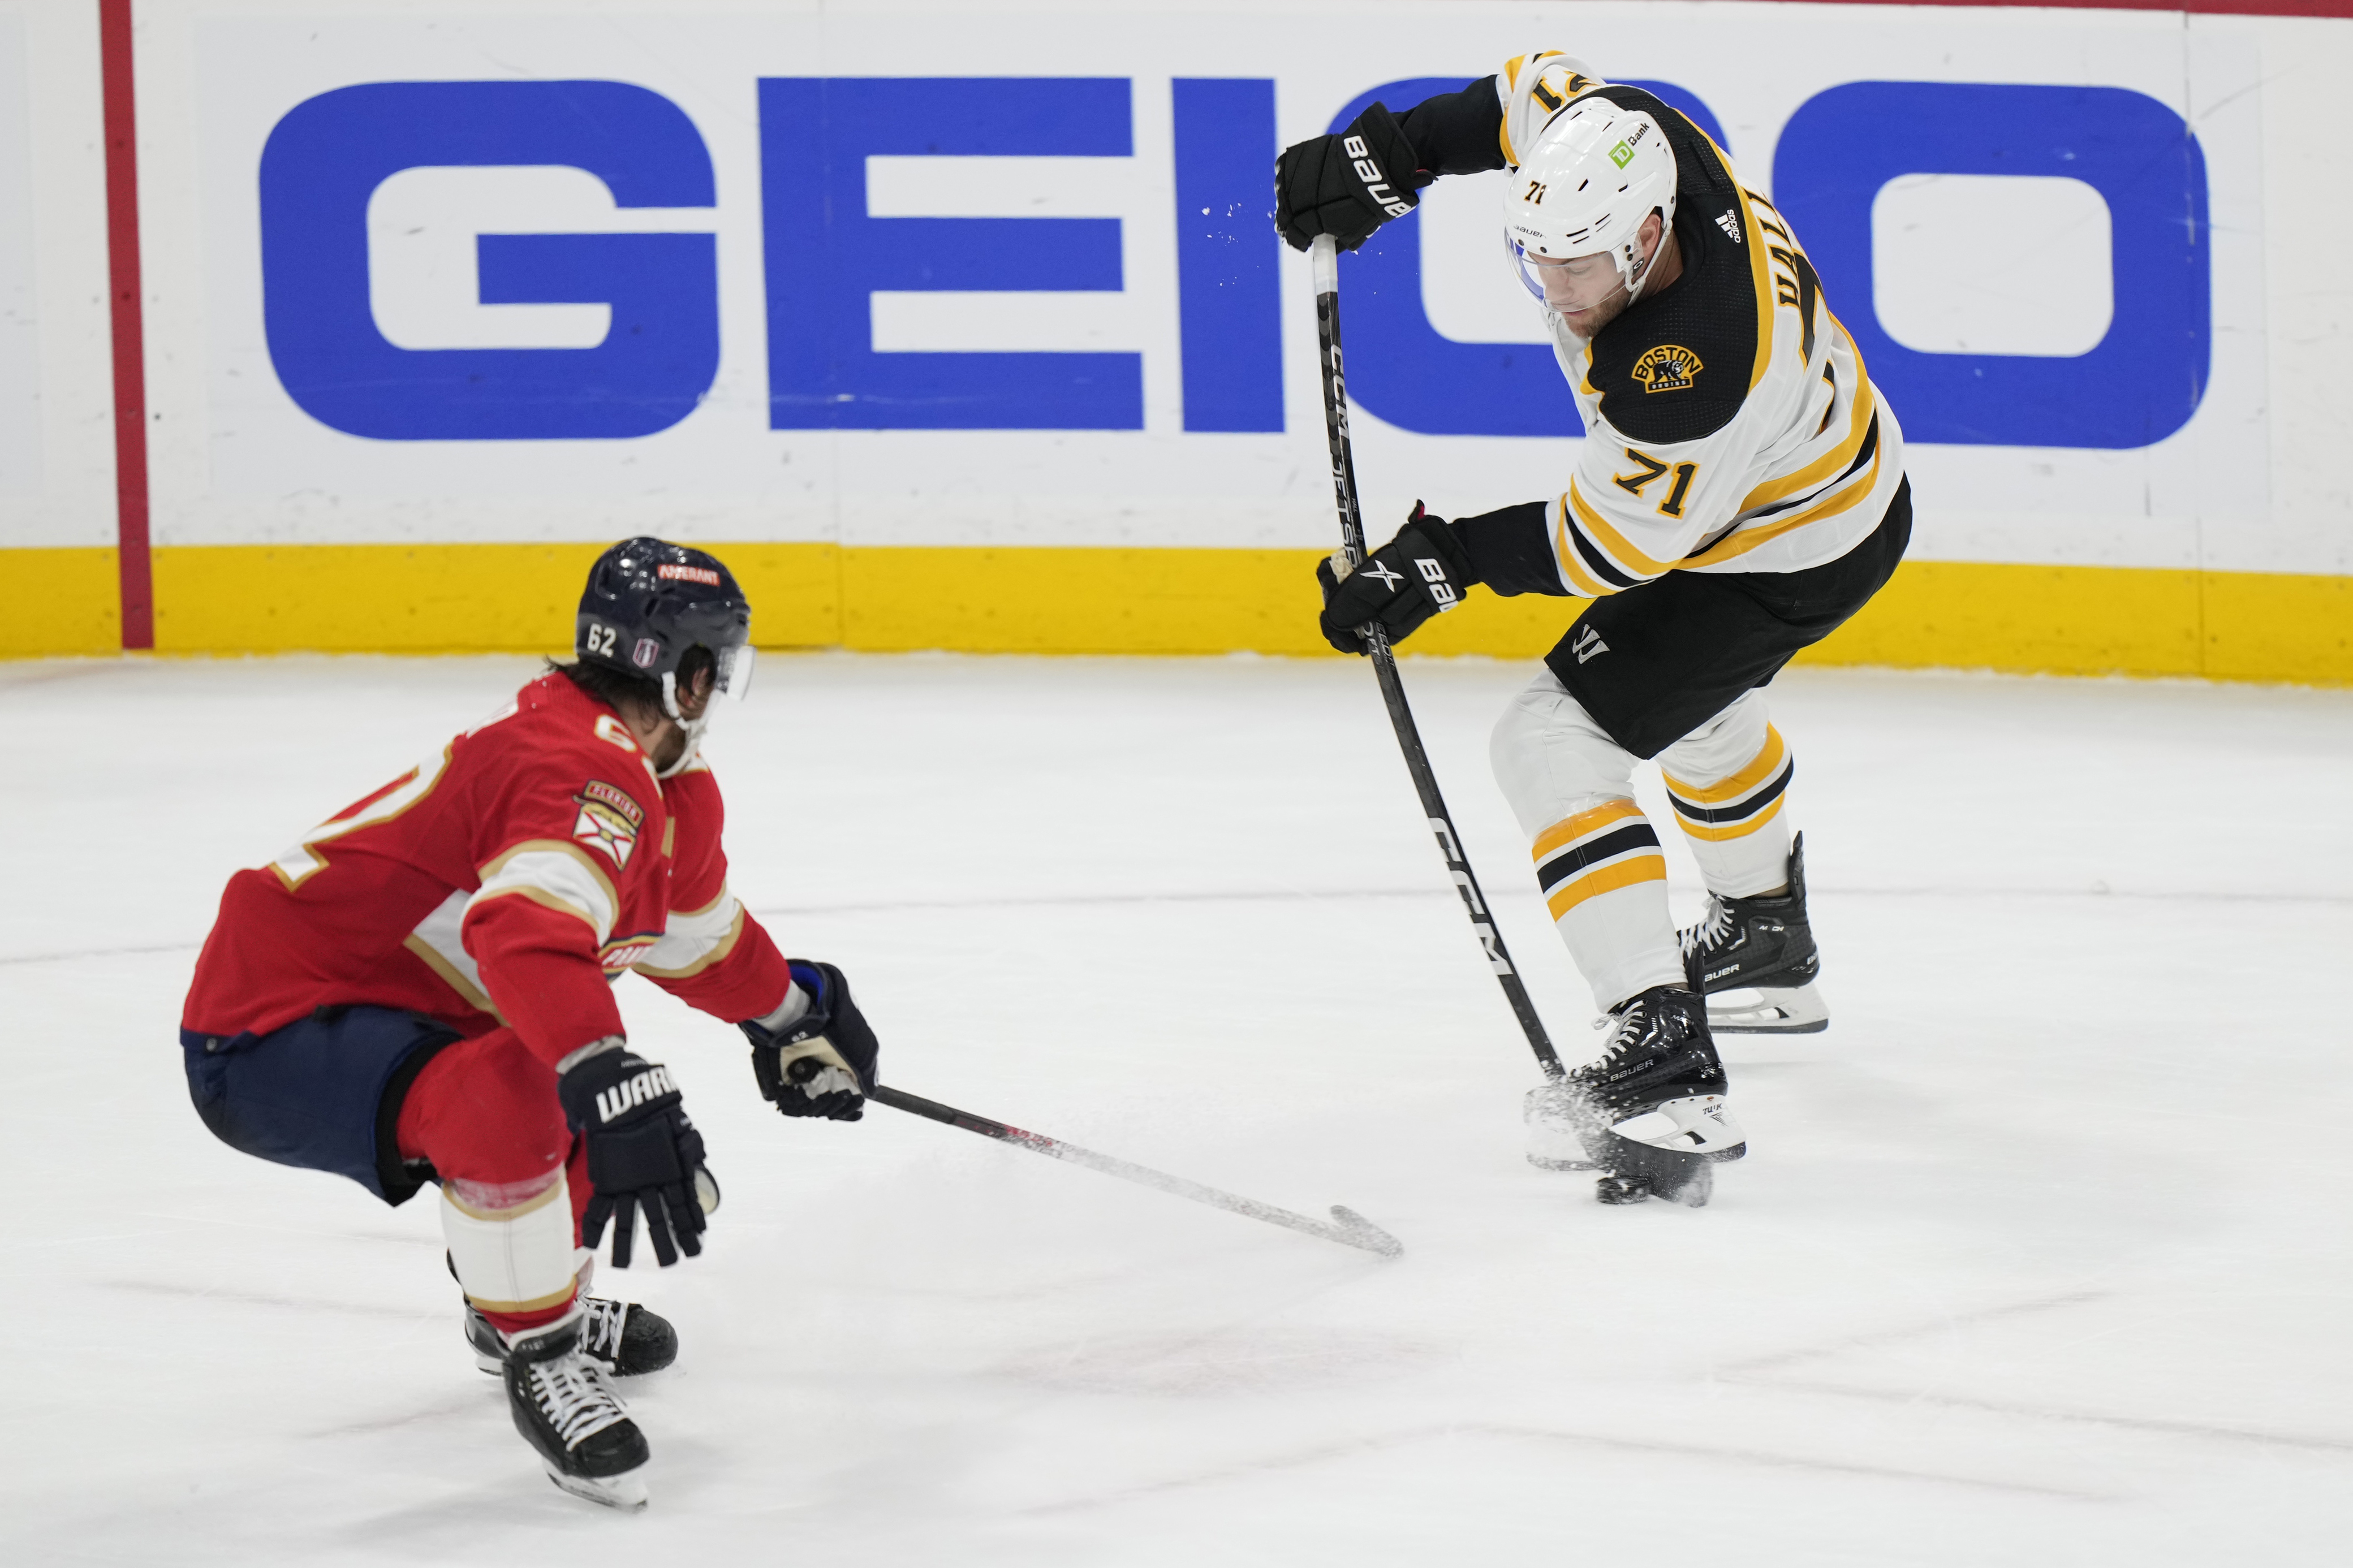 Bruins Lose High-Scoring Game 6, Series Now Heads Back to Boston for Must-Win Game 7